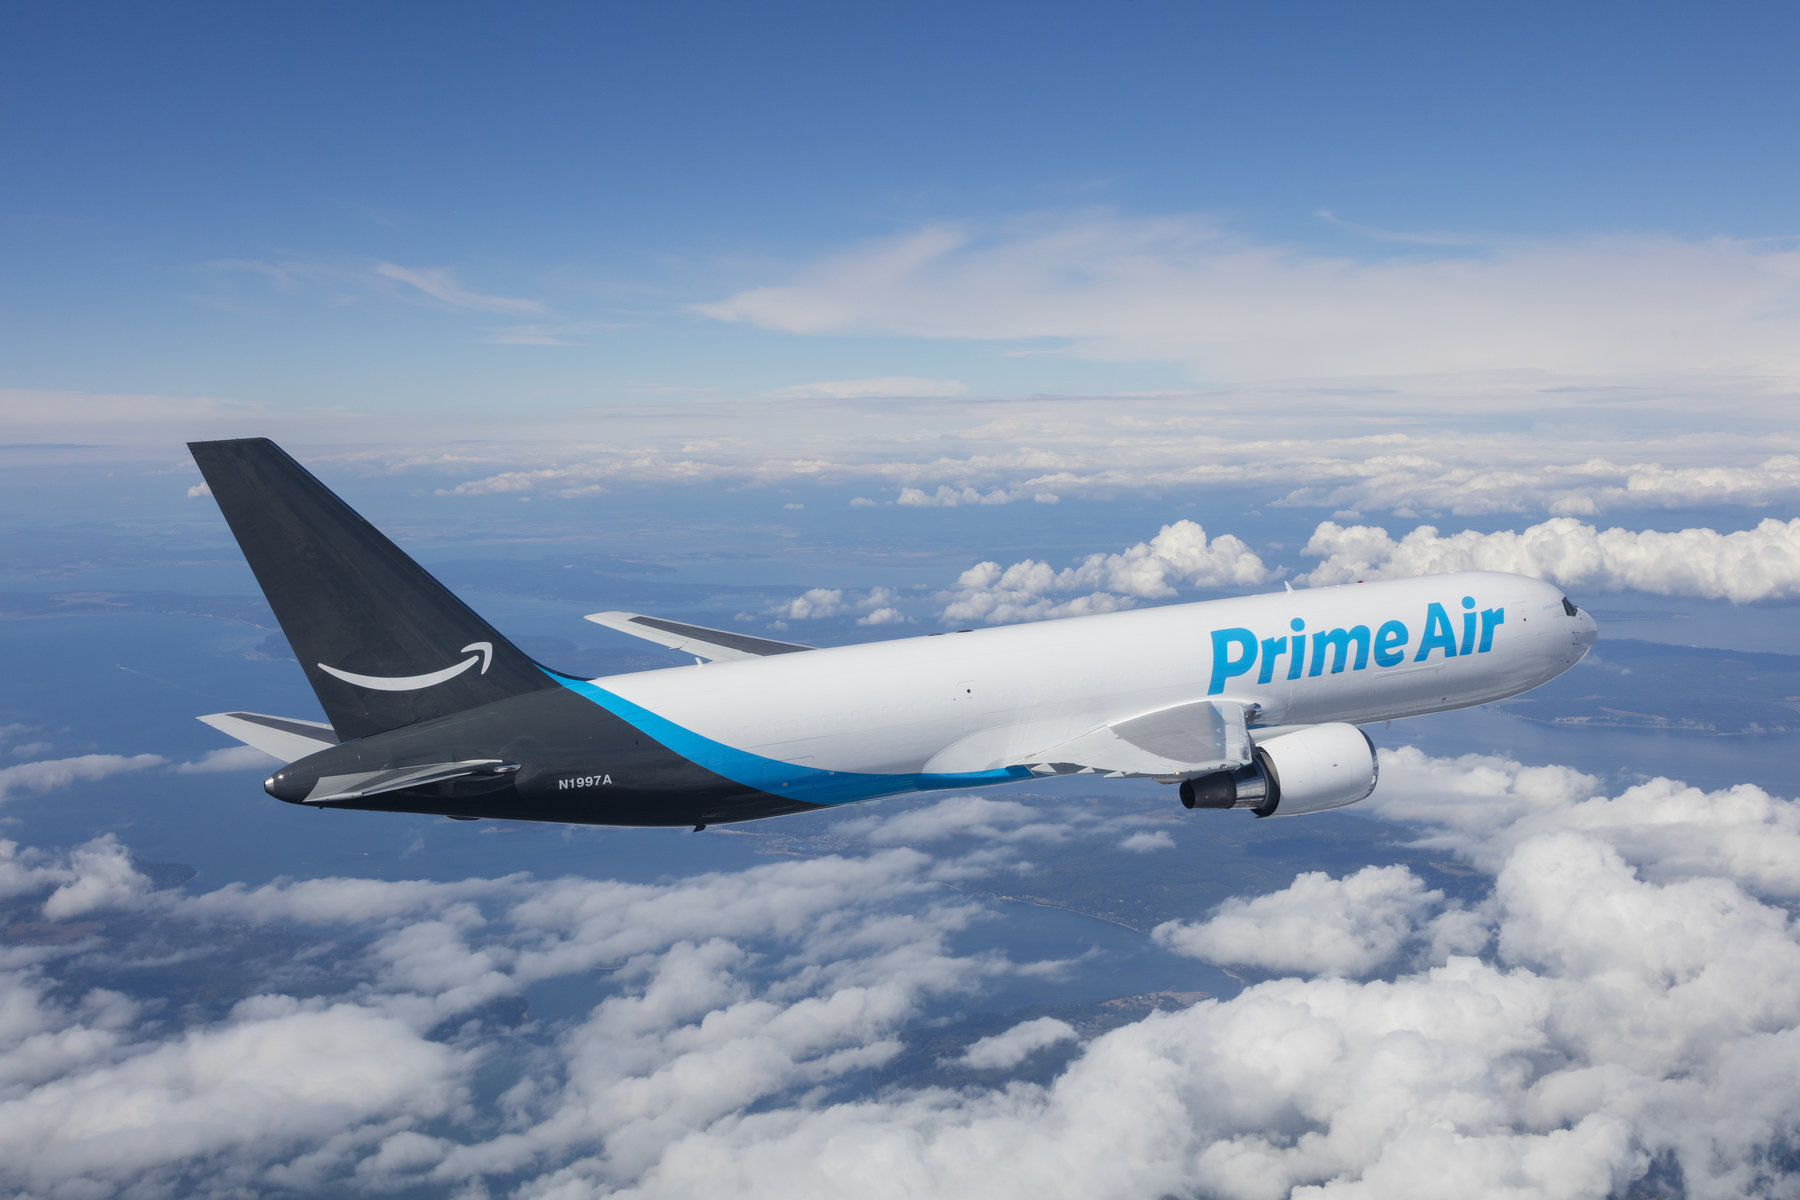 Flight 3591: Amazon Air plan crashes in Texas, all on board believed to be dead